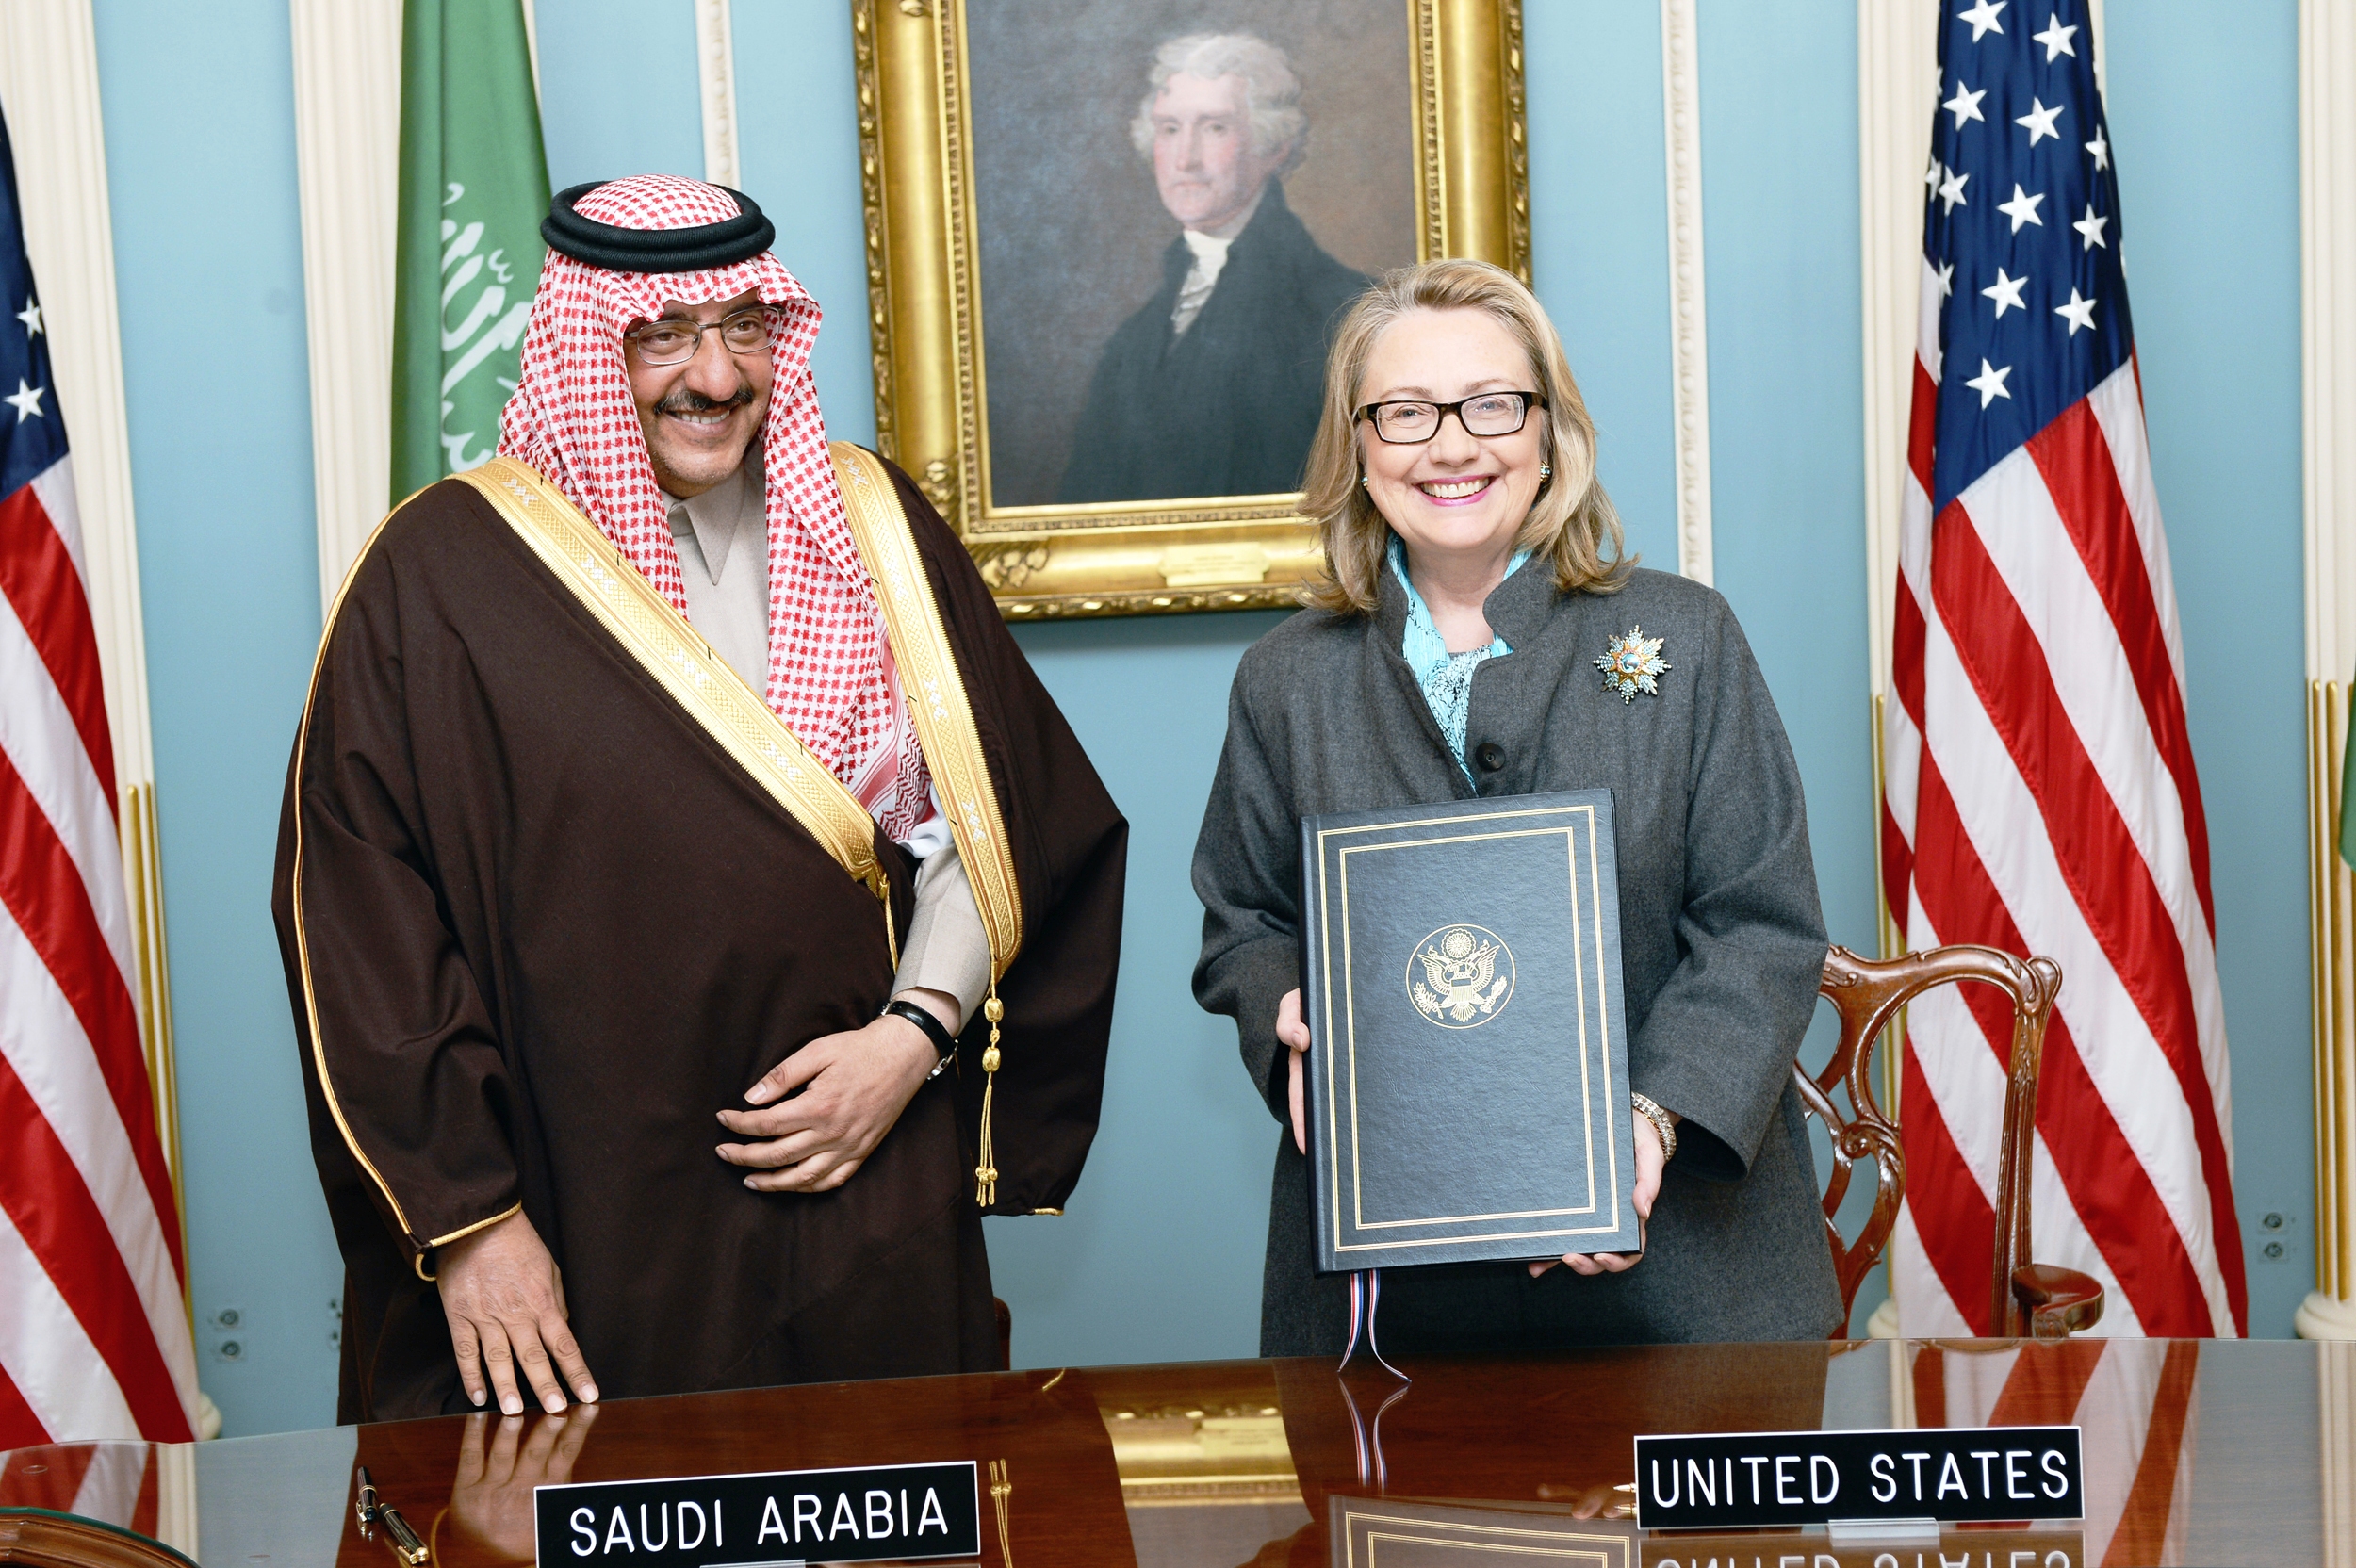 Saudi Arabia’s Crown Prince Mohammad bin Nayef meeting U.S. Secretary of State Hillary Clinton in 2013. Bin Nayef attended PSU from 1977–80. Photo courtesy of the U.S. Department of State